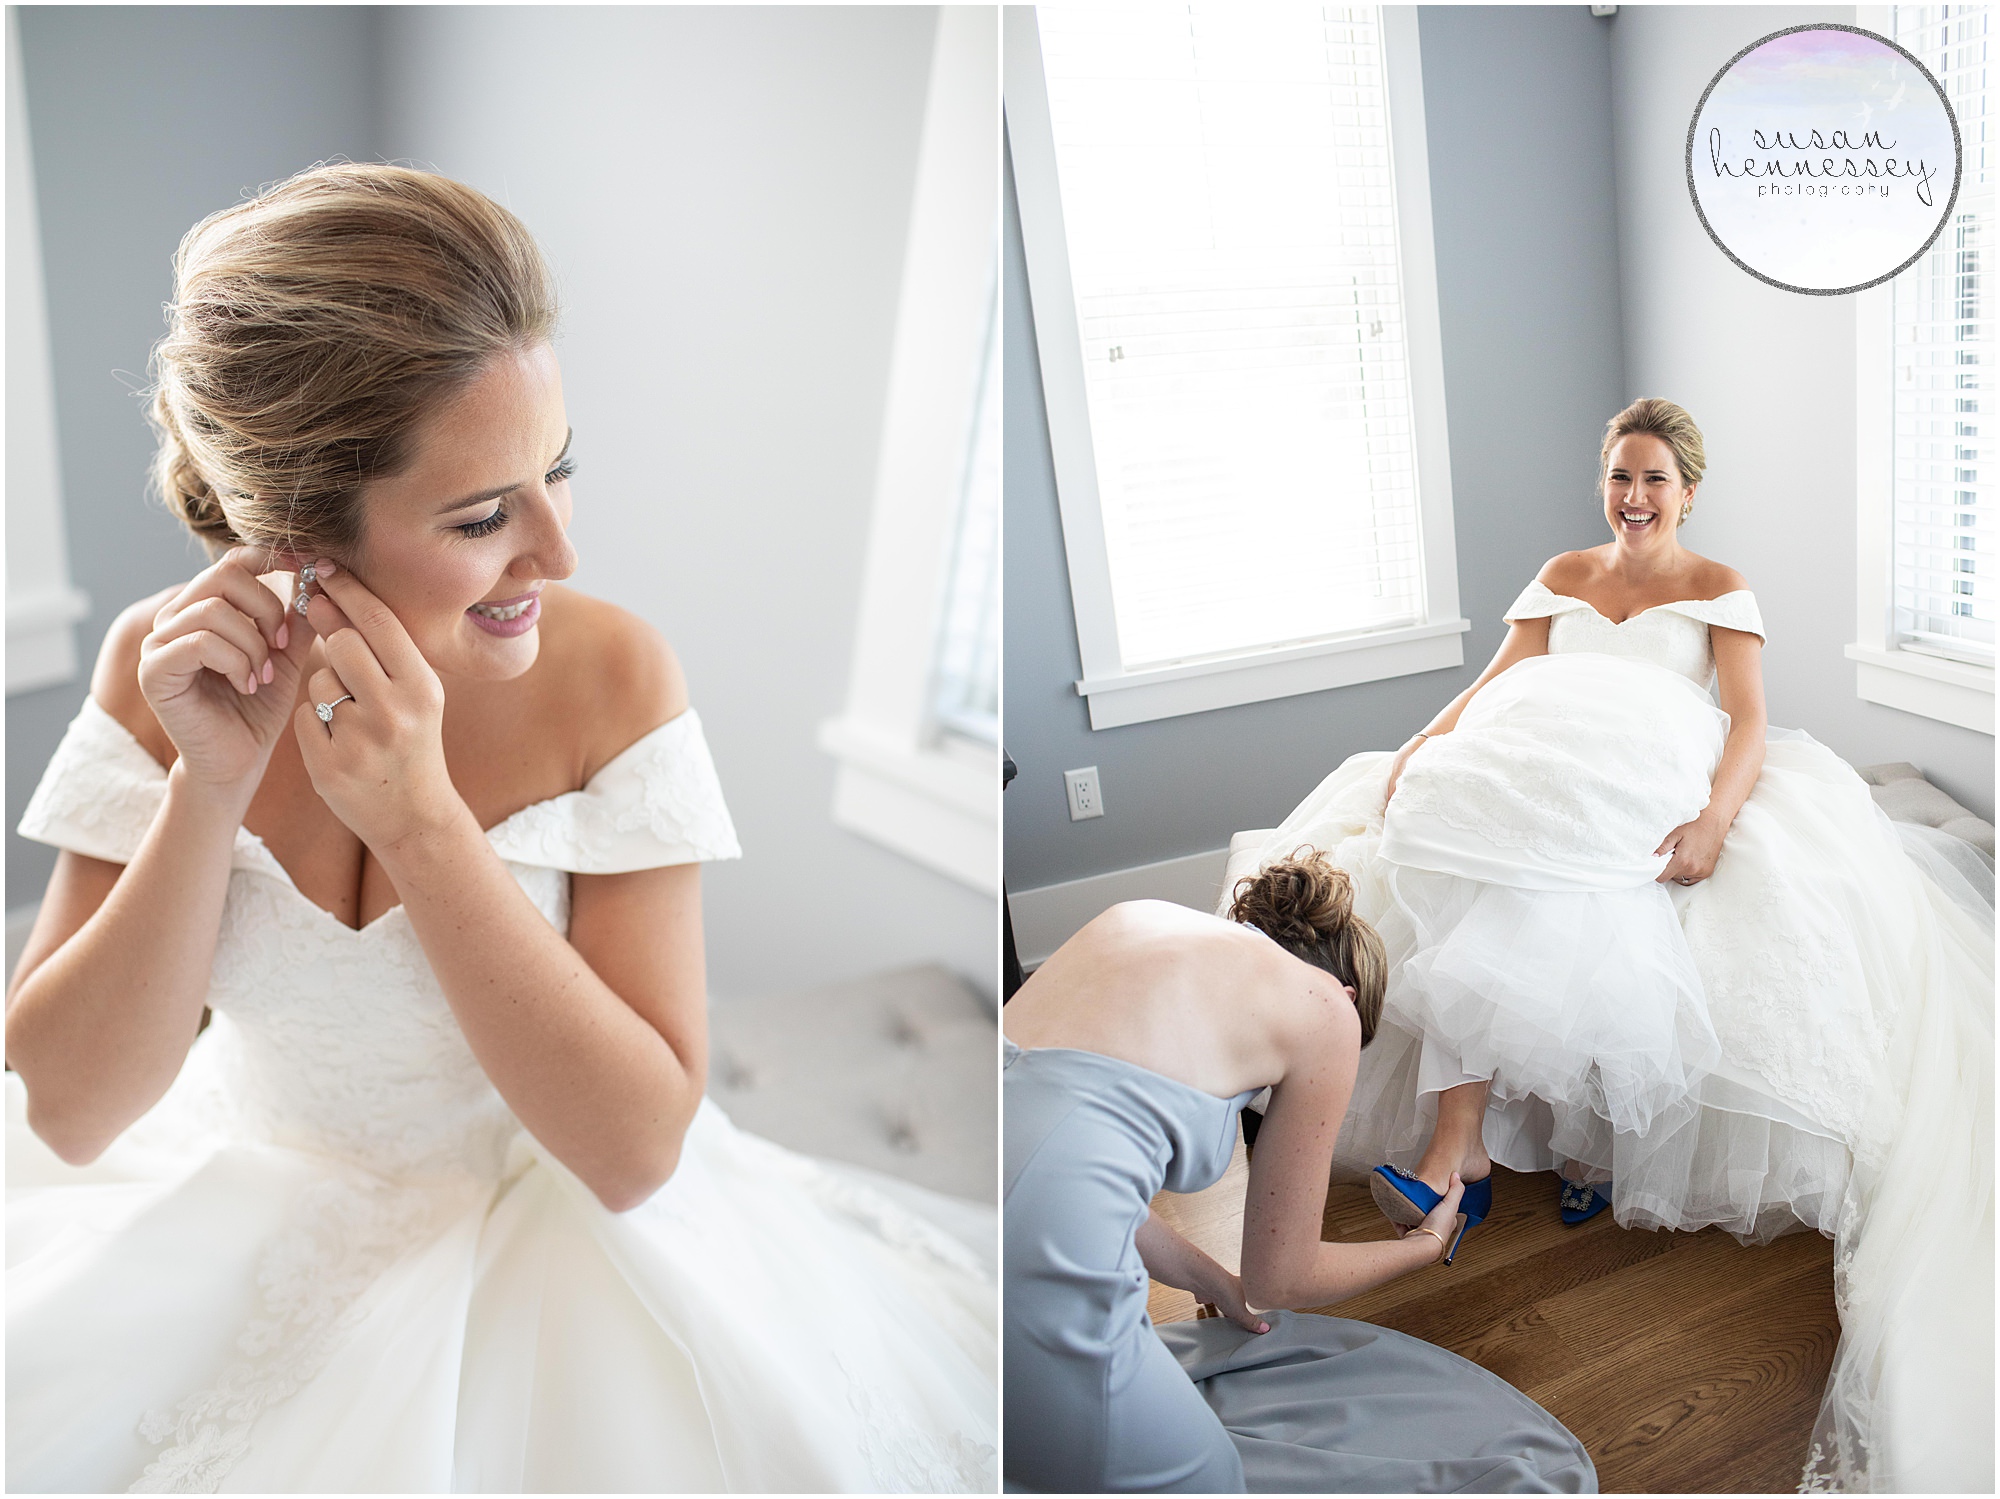 Bride puts on earrings and wedding day shoes.